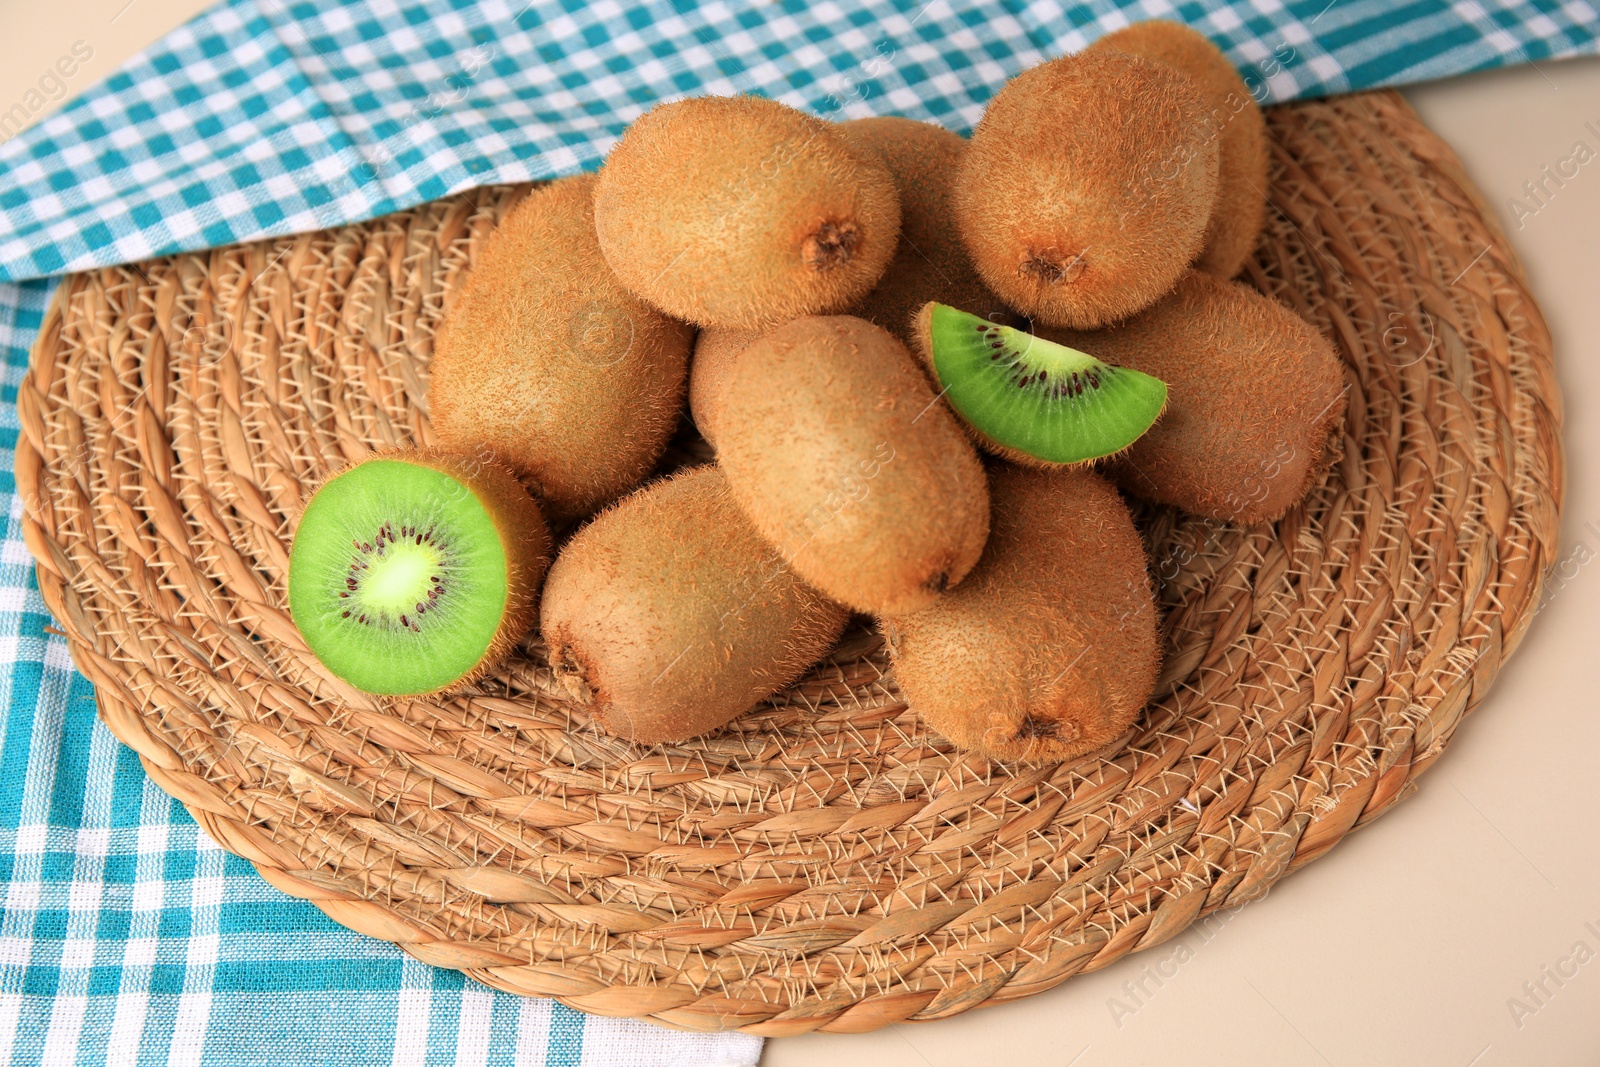 Photo of Heap of whole and cut fresh kiwis on white table